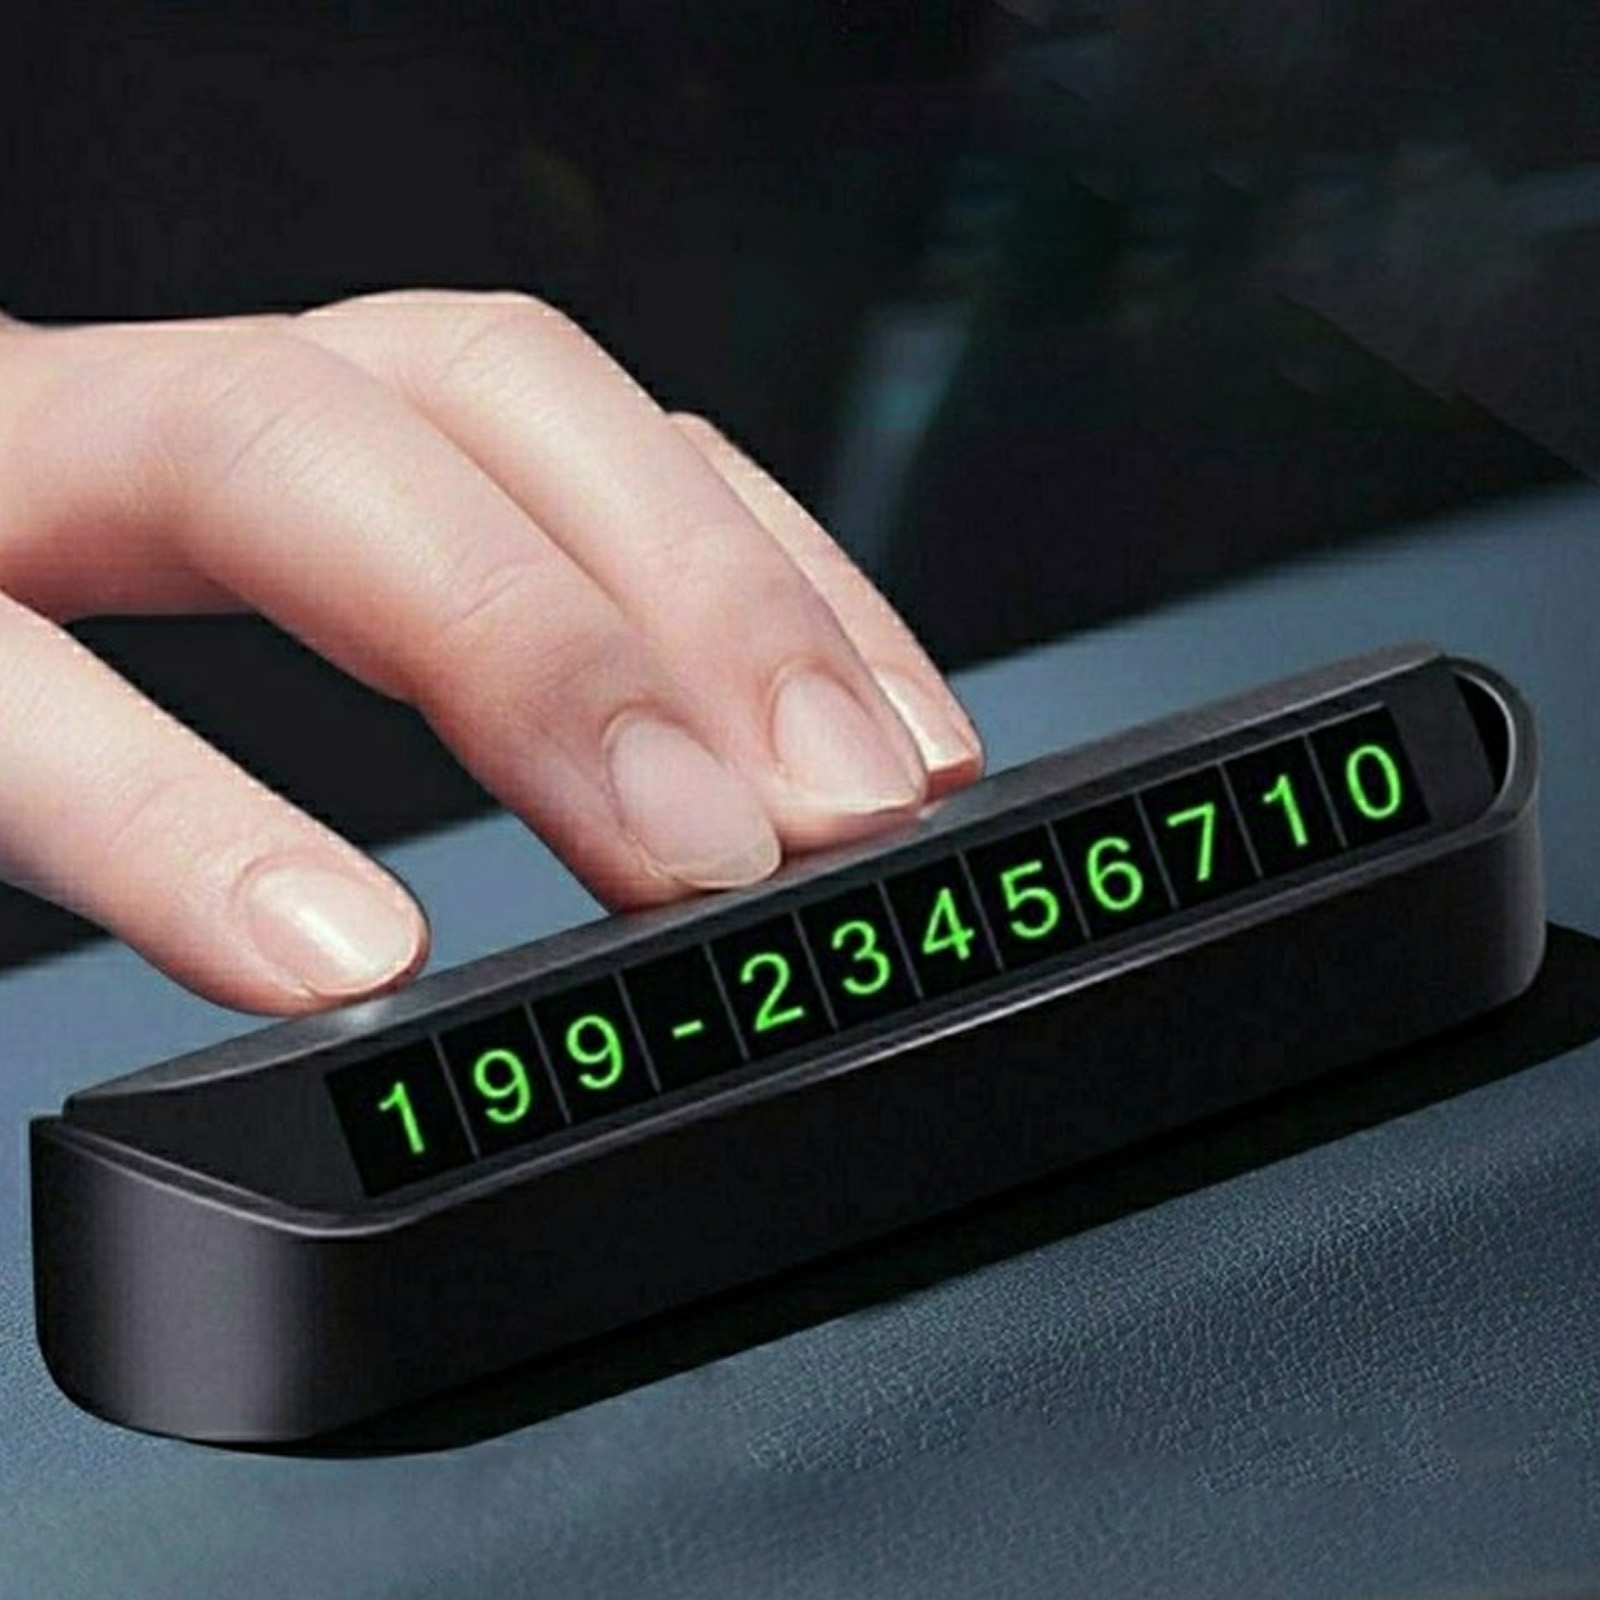 Temporary Car Parking Card Phone Number Card Plate Telephone Number Car Park Stop in Car-styling Automobile Accessories 